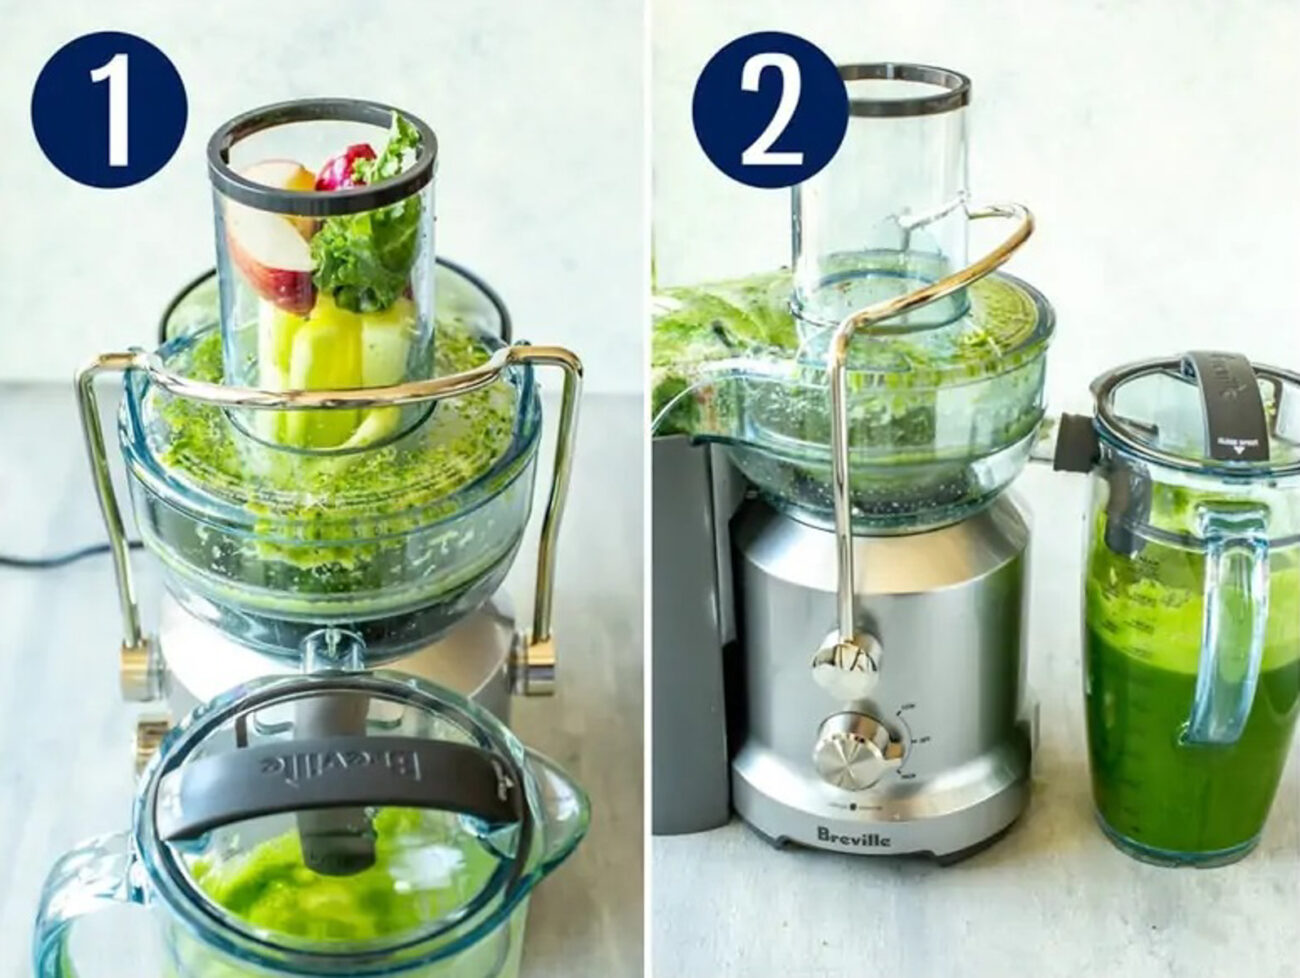 Steps 1 and 2 for making juices: Prep your produce and run it through your juicer.